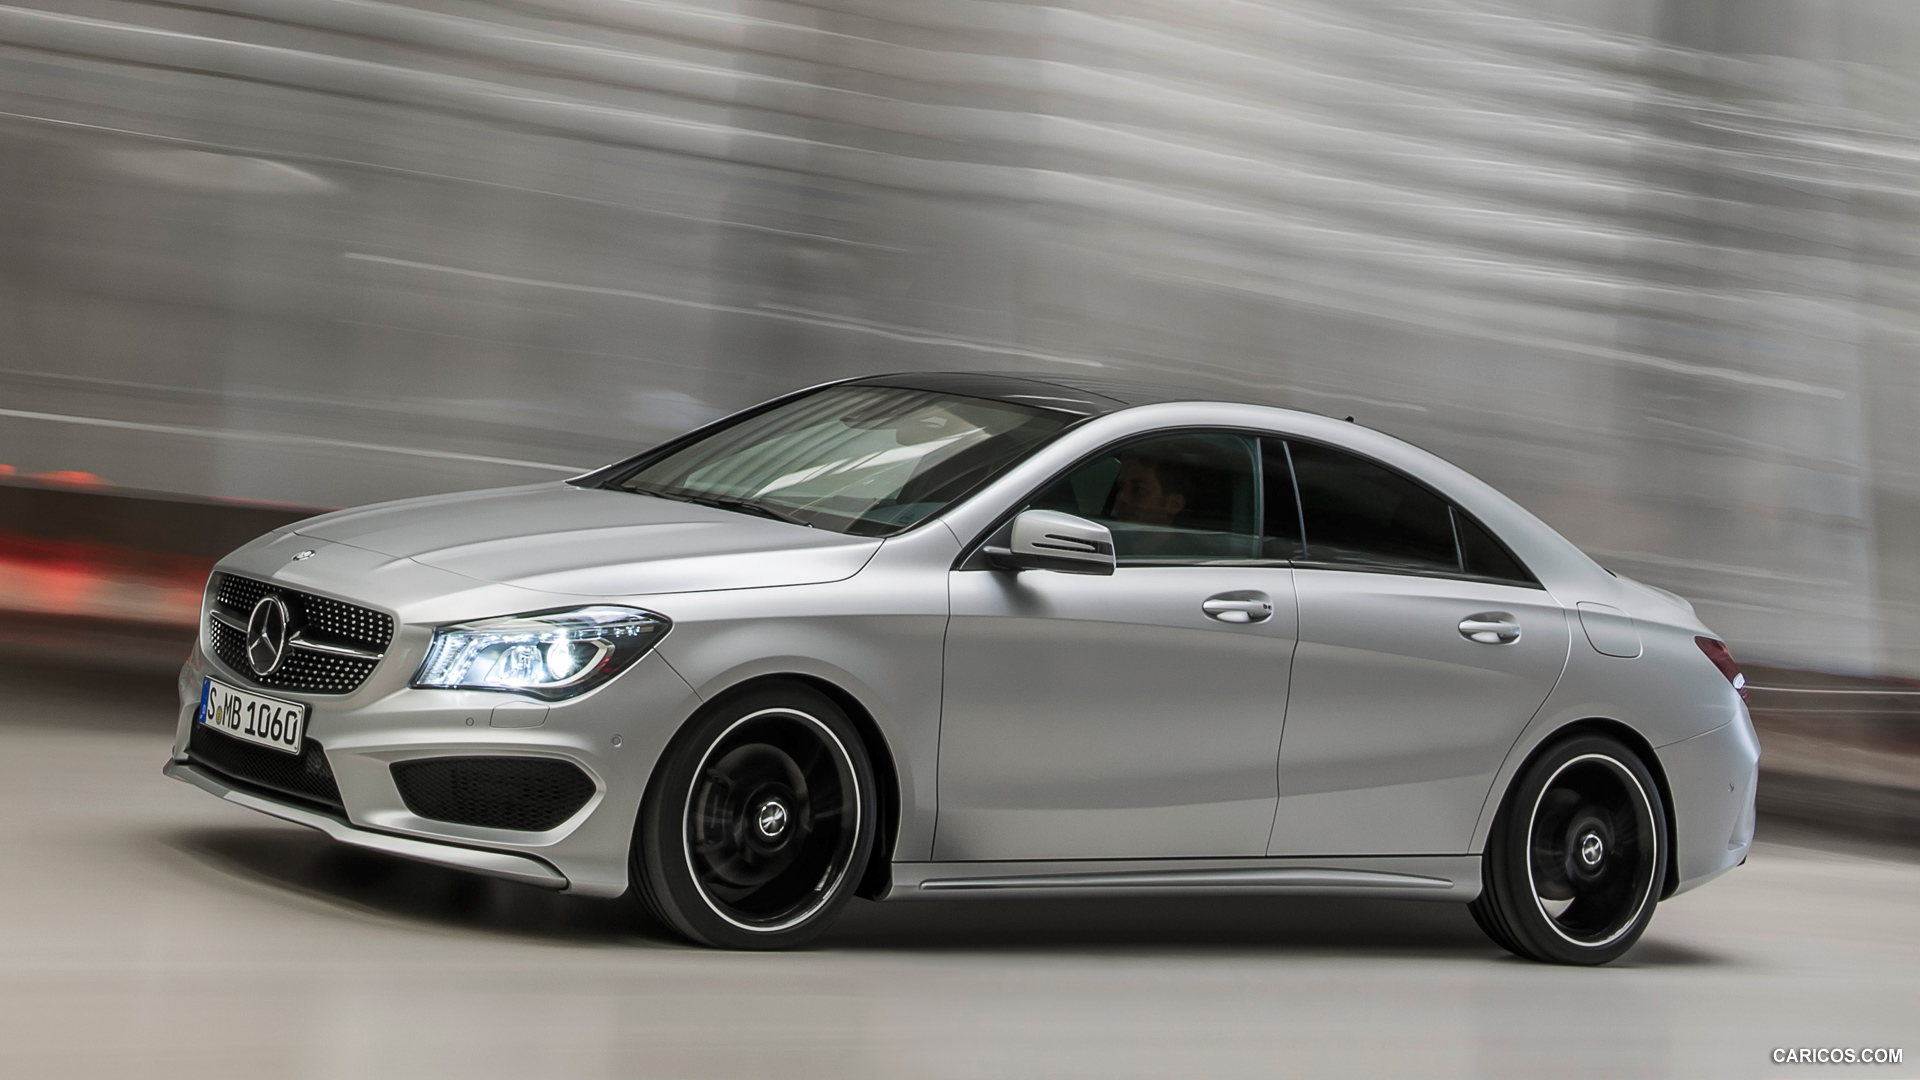 2014 Mercedes-Benz CLA-Class CLA 250 Edition 1 - Side, #10 of 183